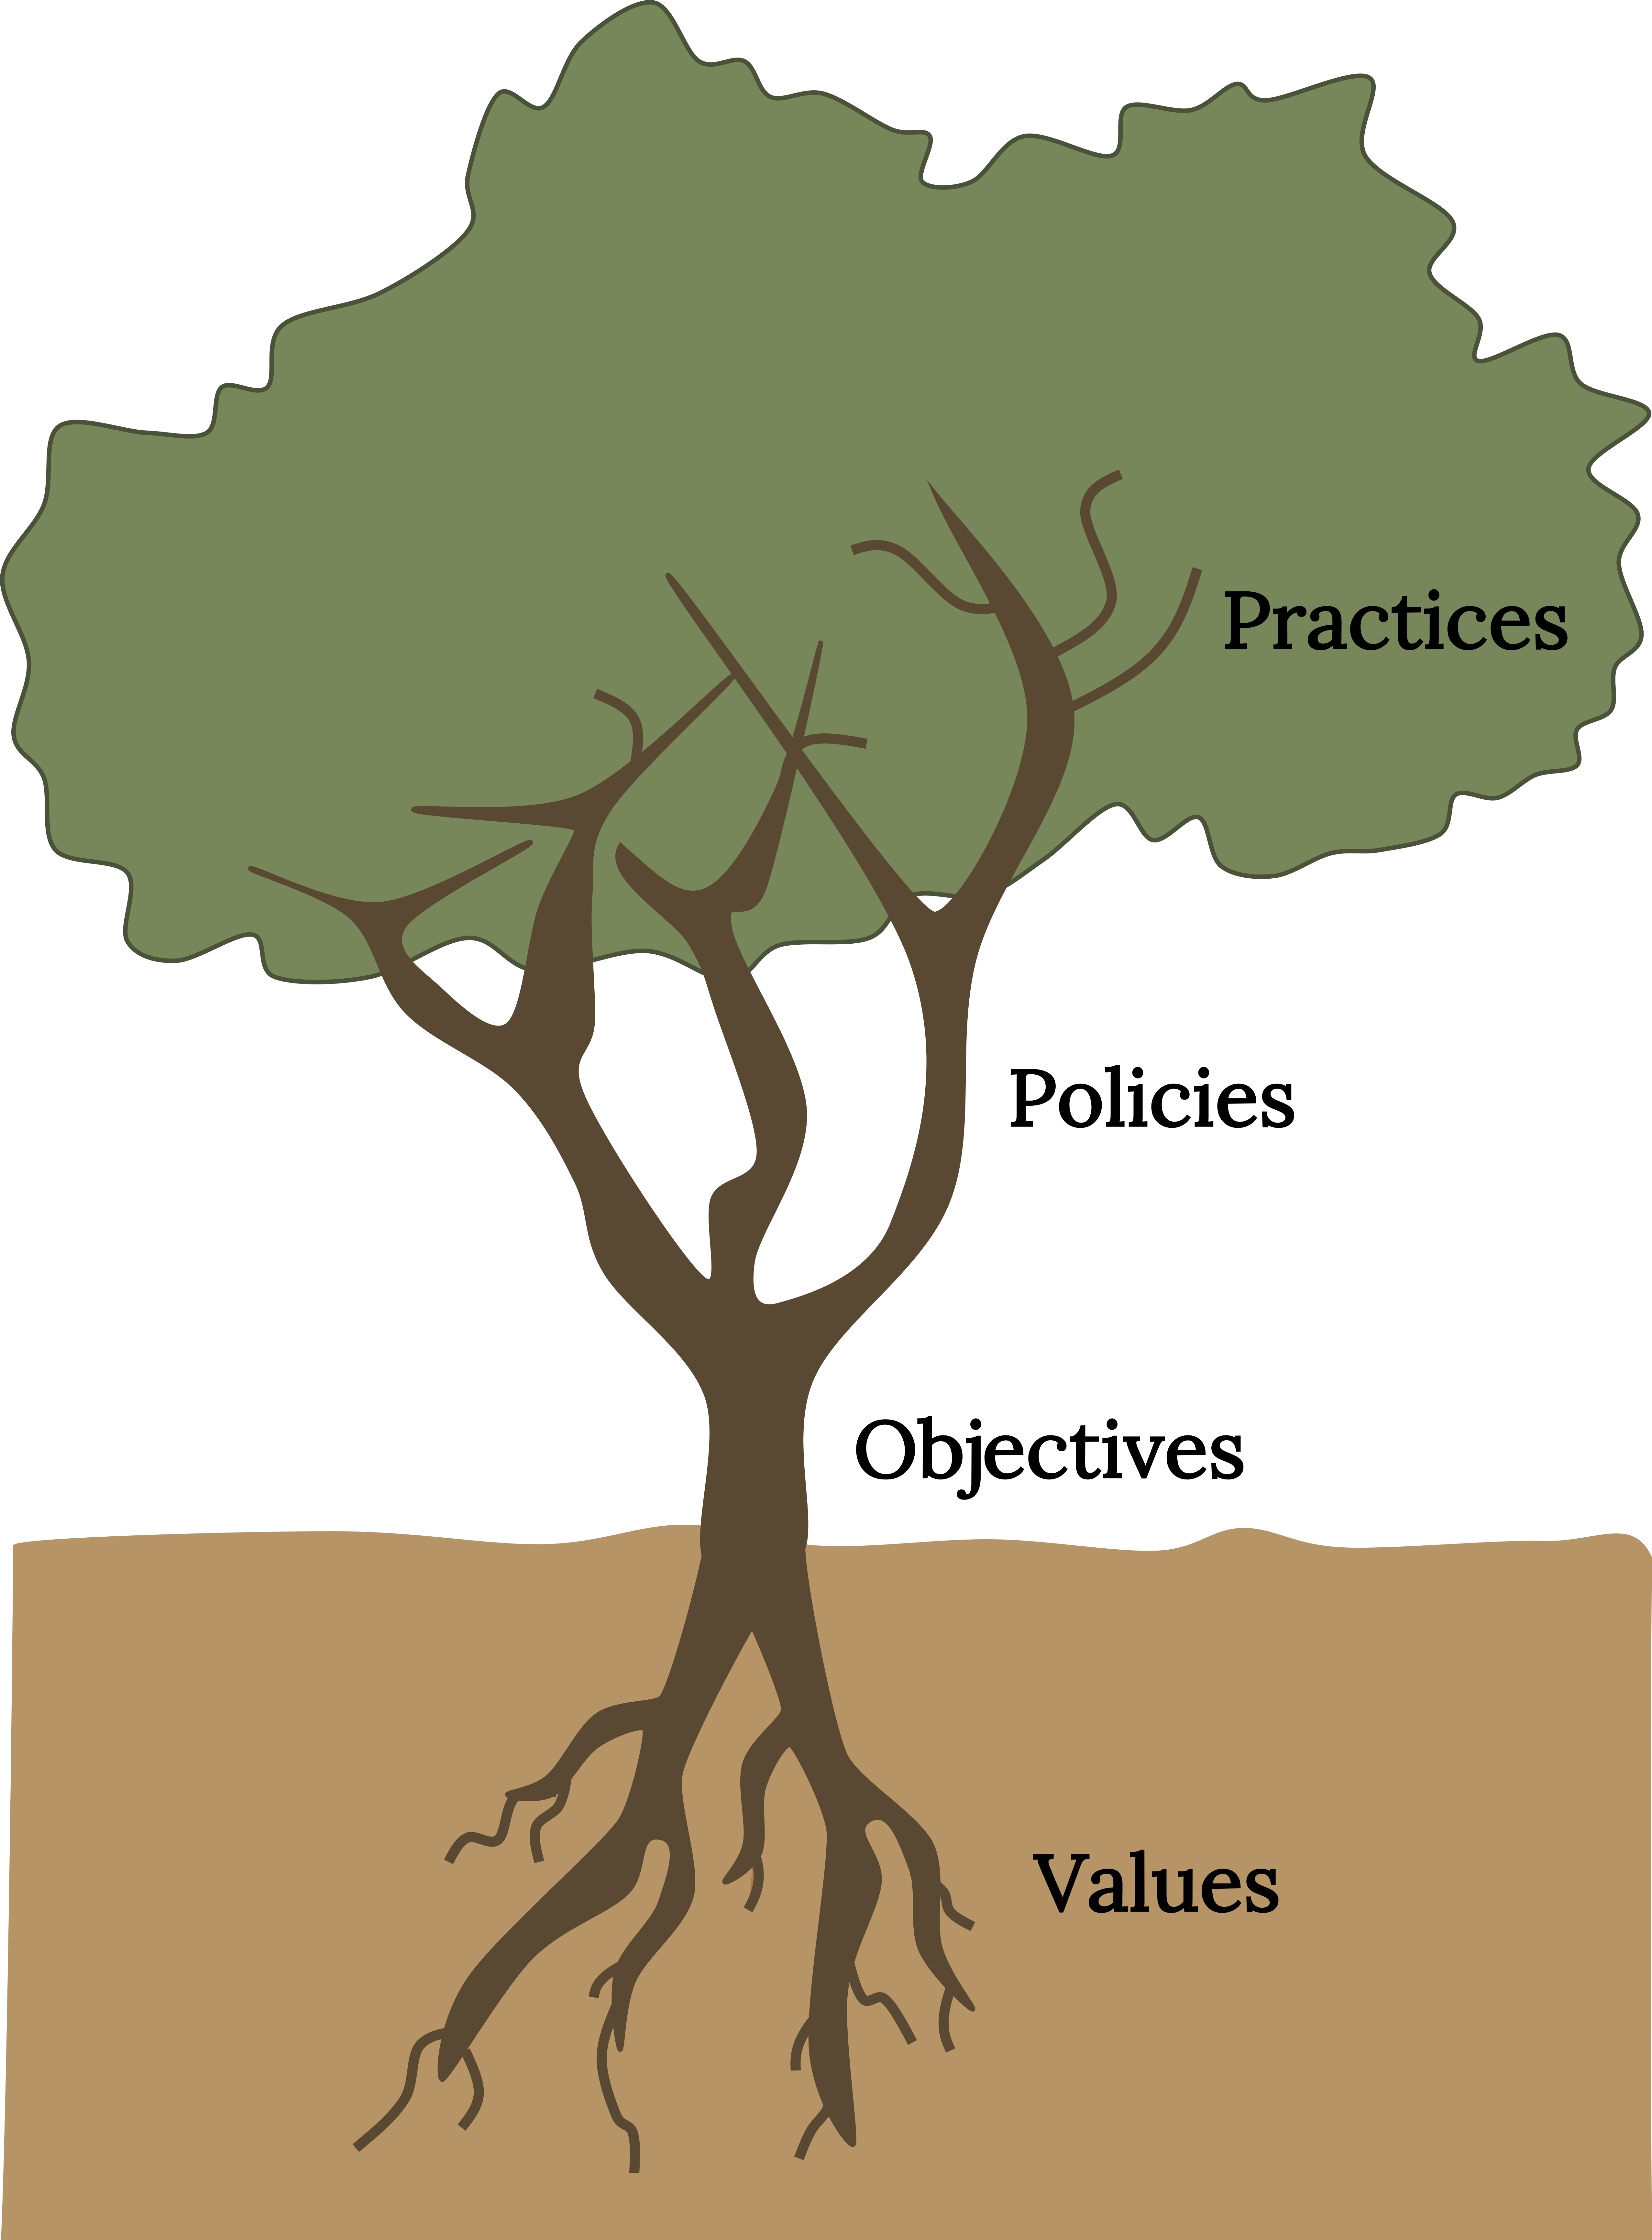 Tree diagram. From roots to leaves: values, objectives, policies, practices.